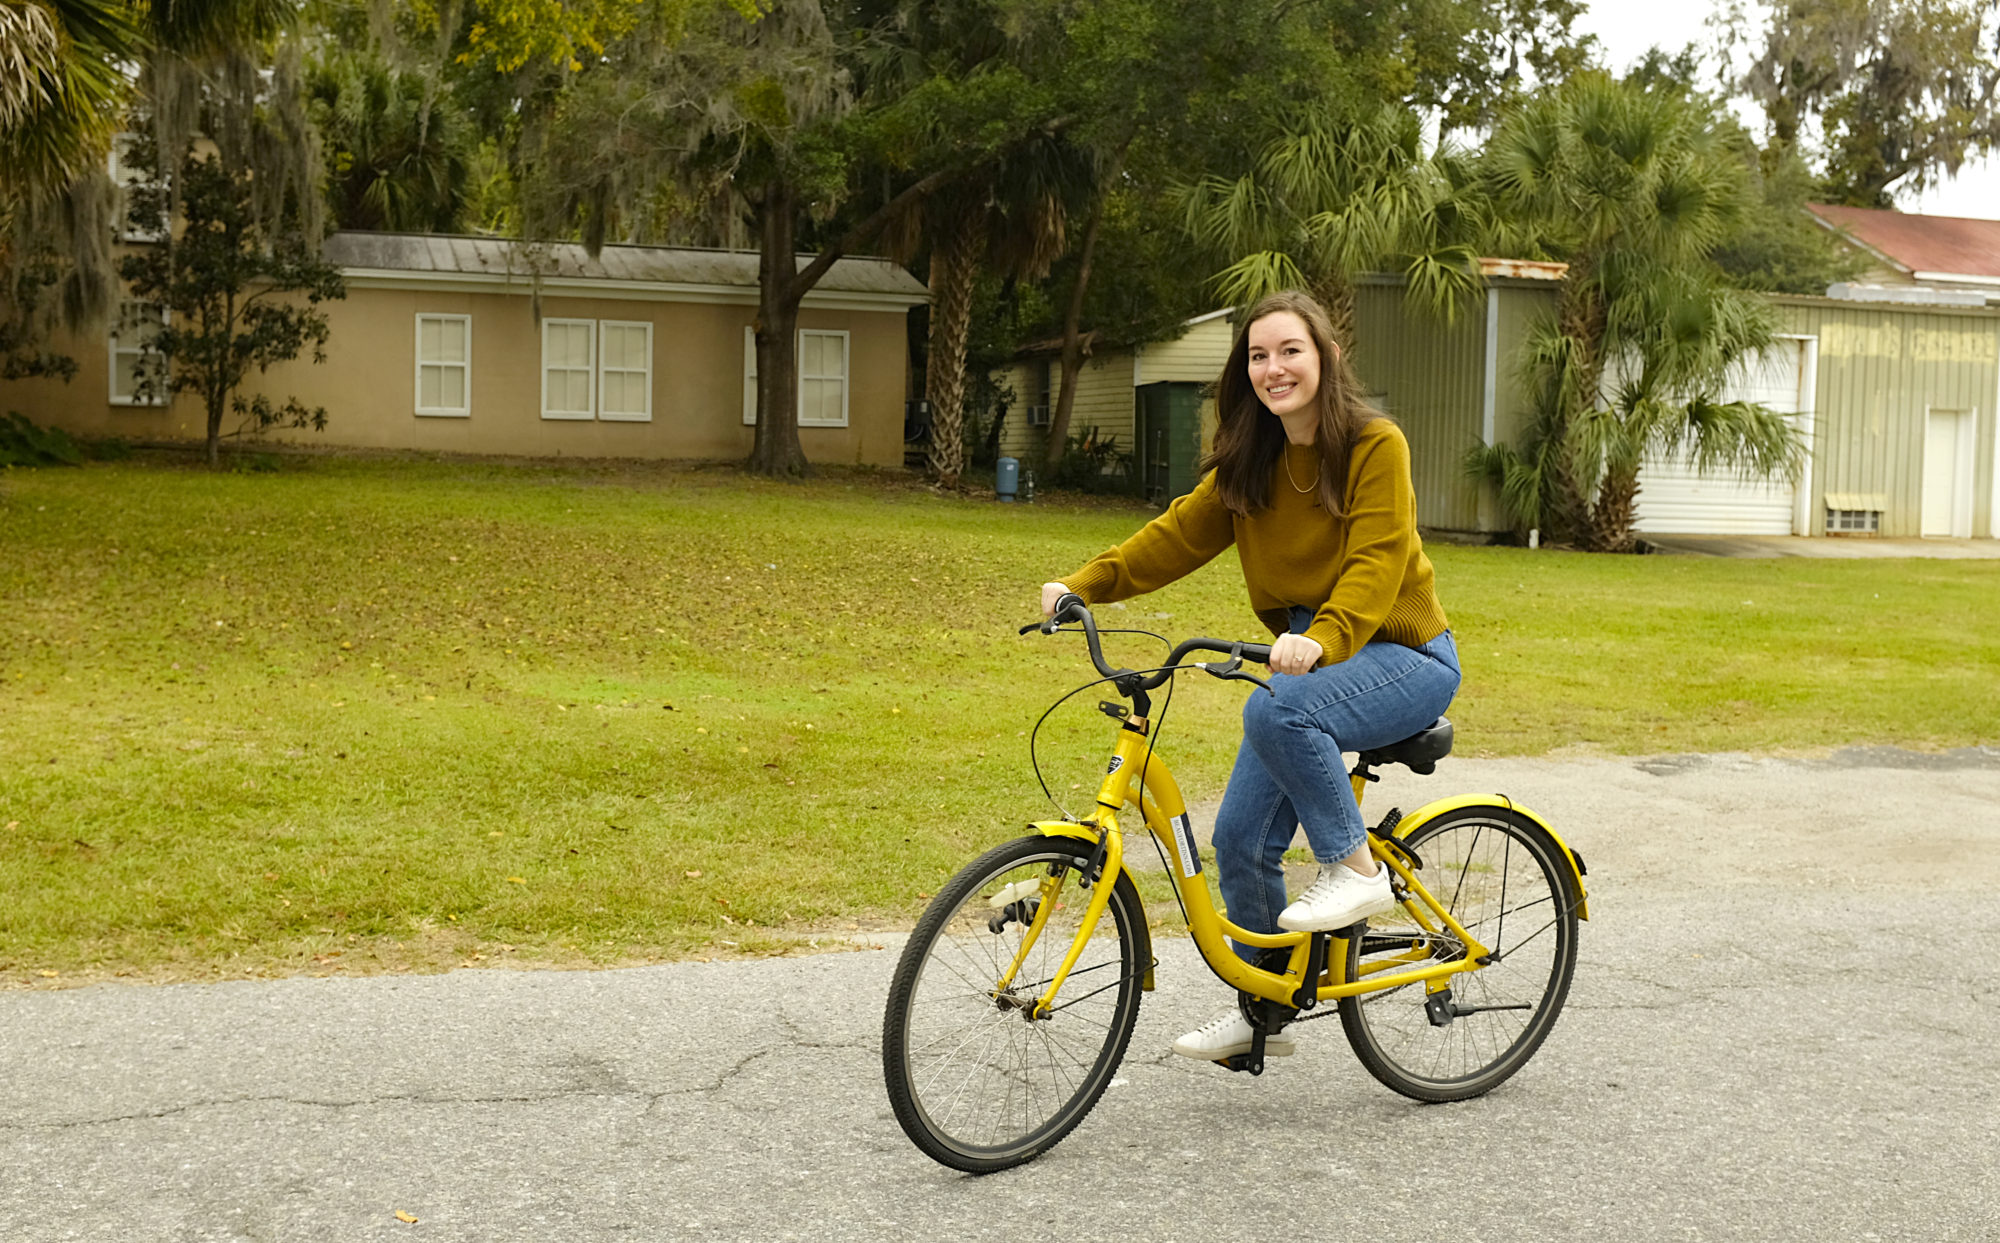 Alyssa rides a bike in a green sweater and blue jeans